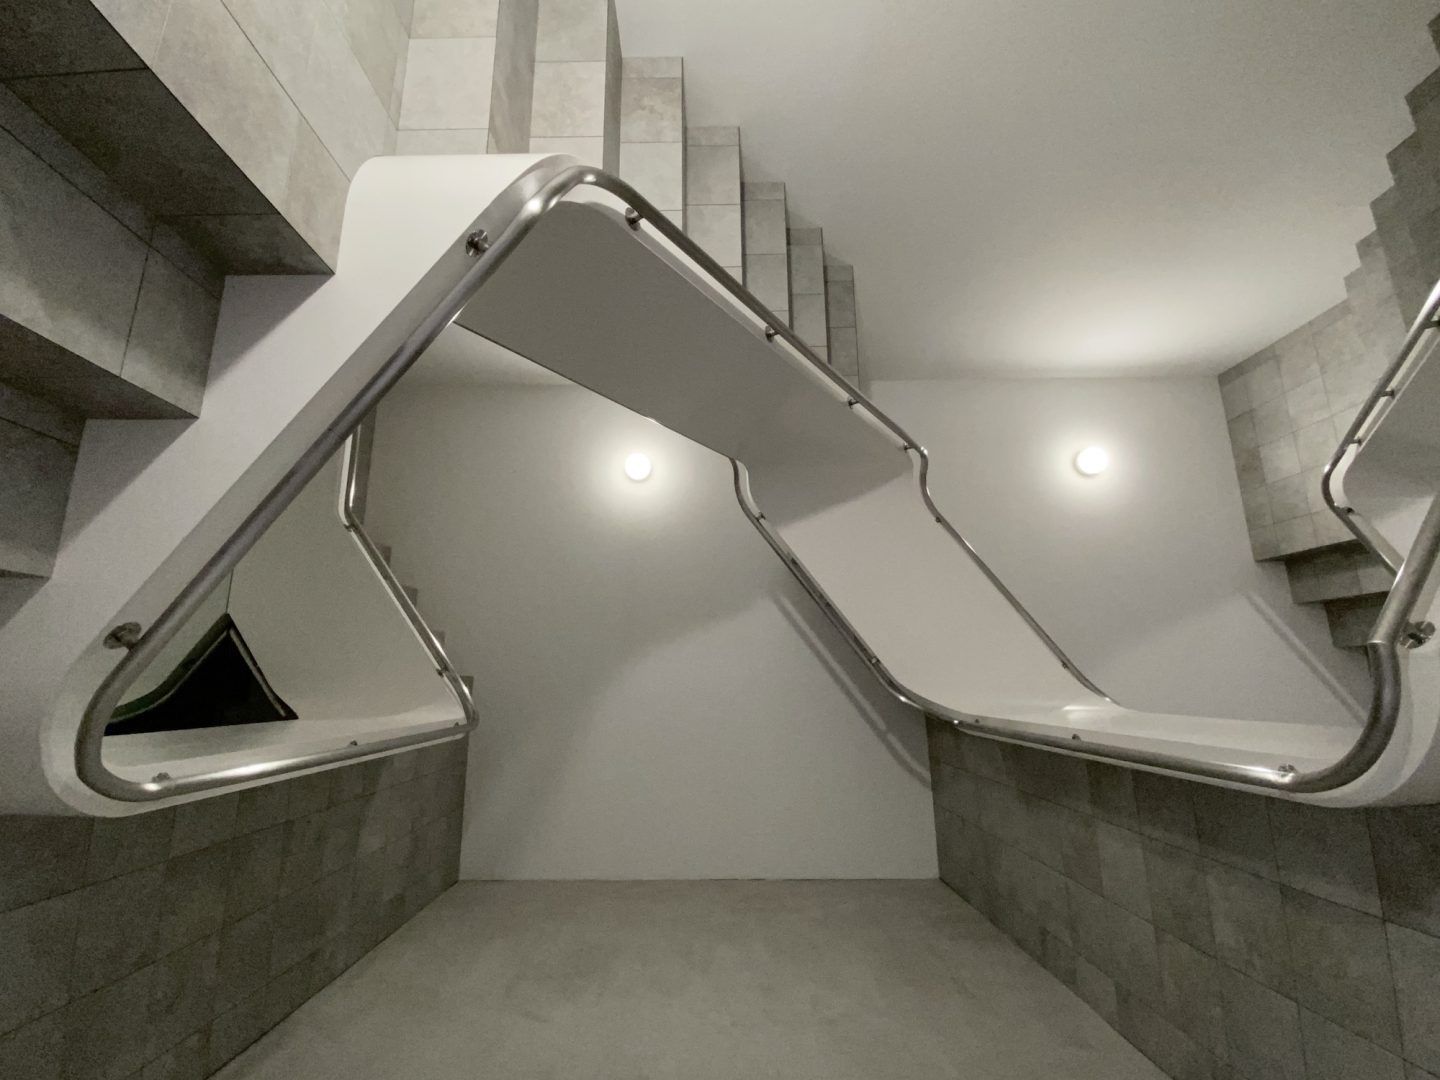 Illusory Infinite Staircase by Leandro Erlich